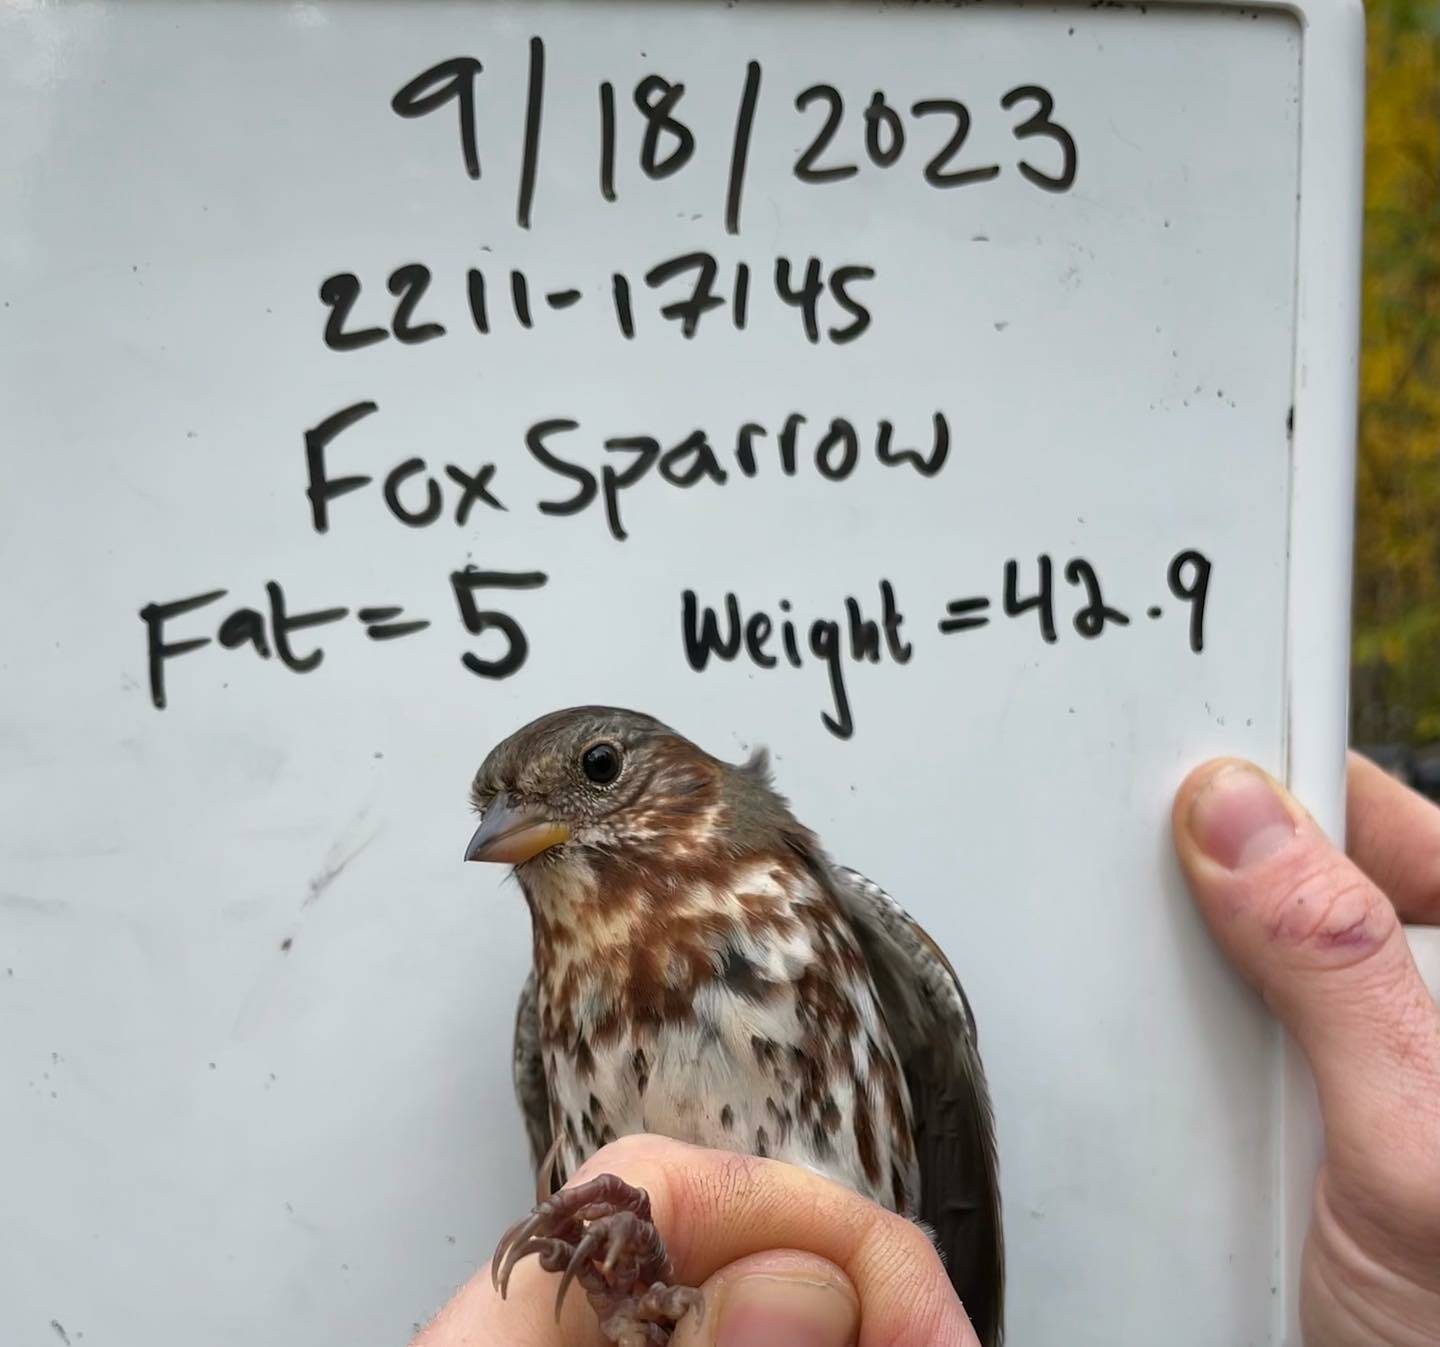 A fox sparrow captured a few times at the Creamer’s Field Migration Station waits for release in the hand of a biologist, who judged this bird to have a fat value of 5 out of a possible 7. (Photo courtesy of Alaska Songbird Institute)